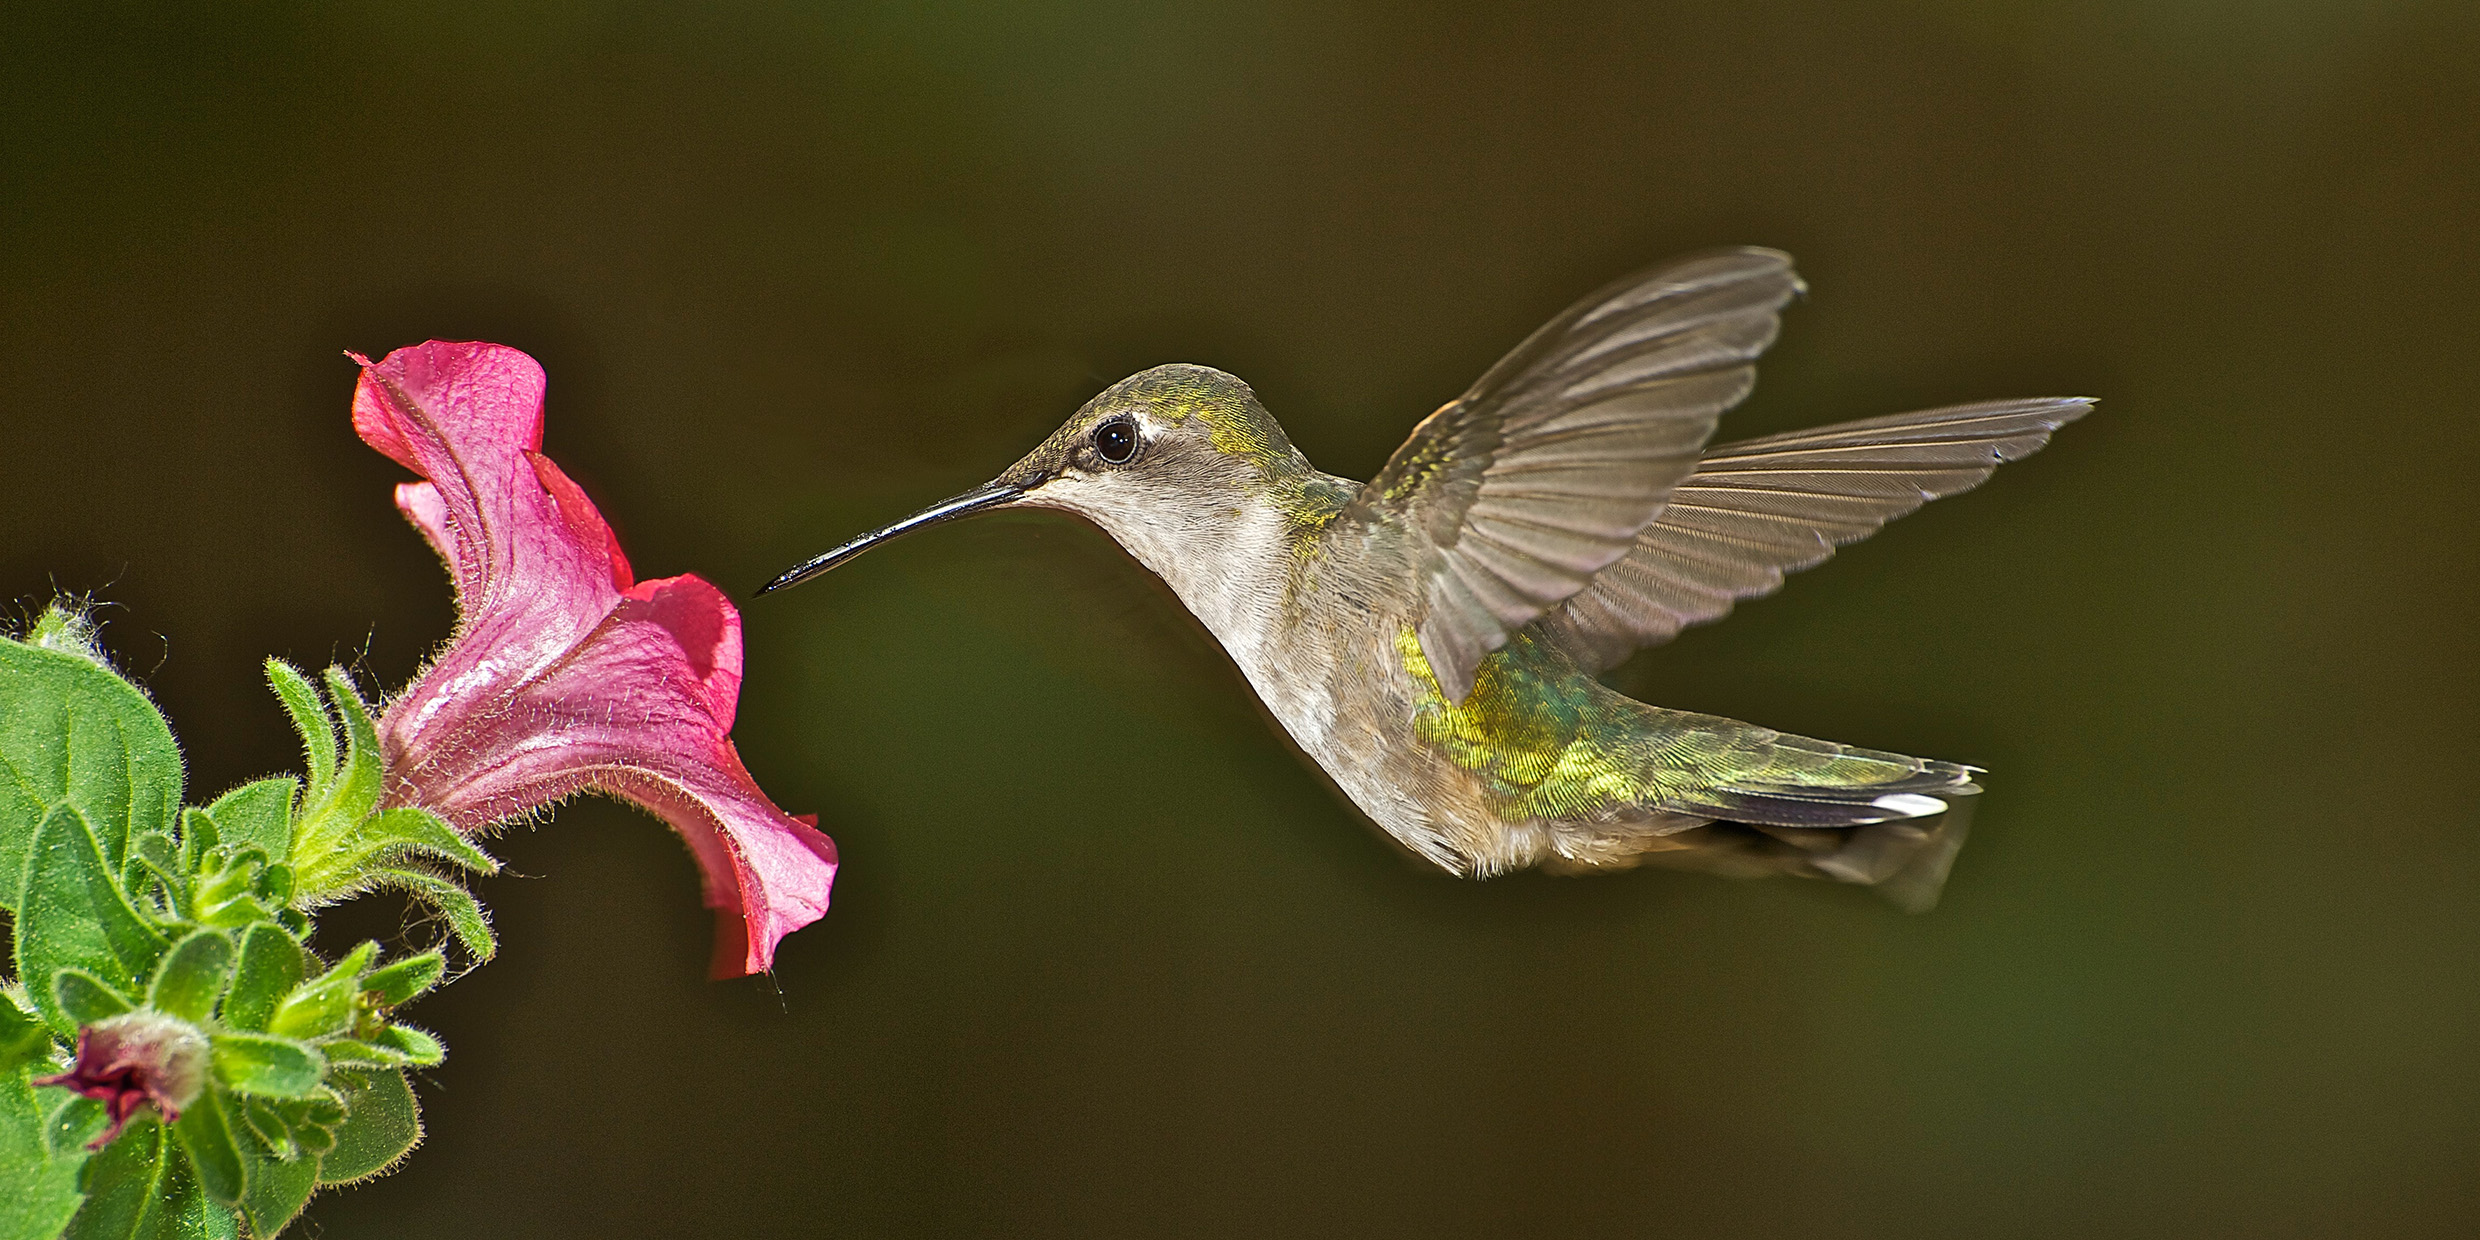 Image of a hummingbird hovering beside a flower blossom